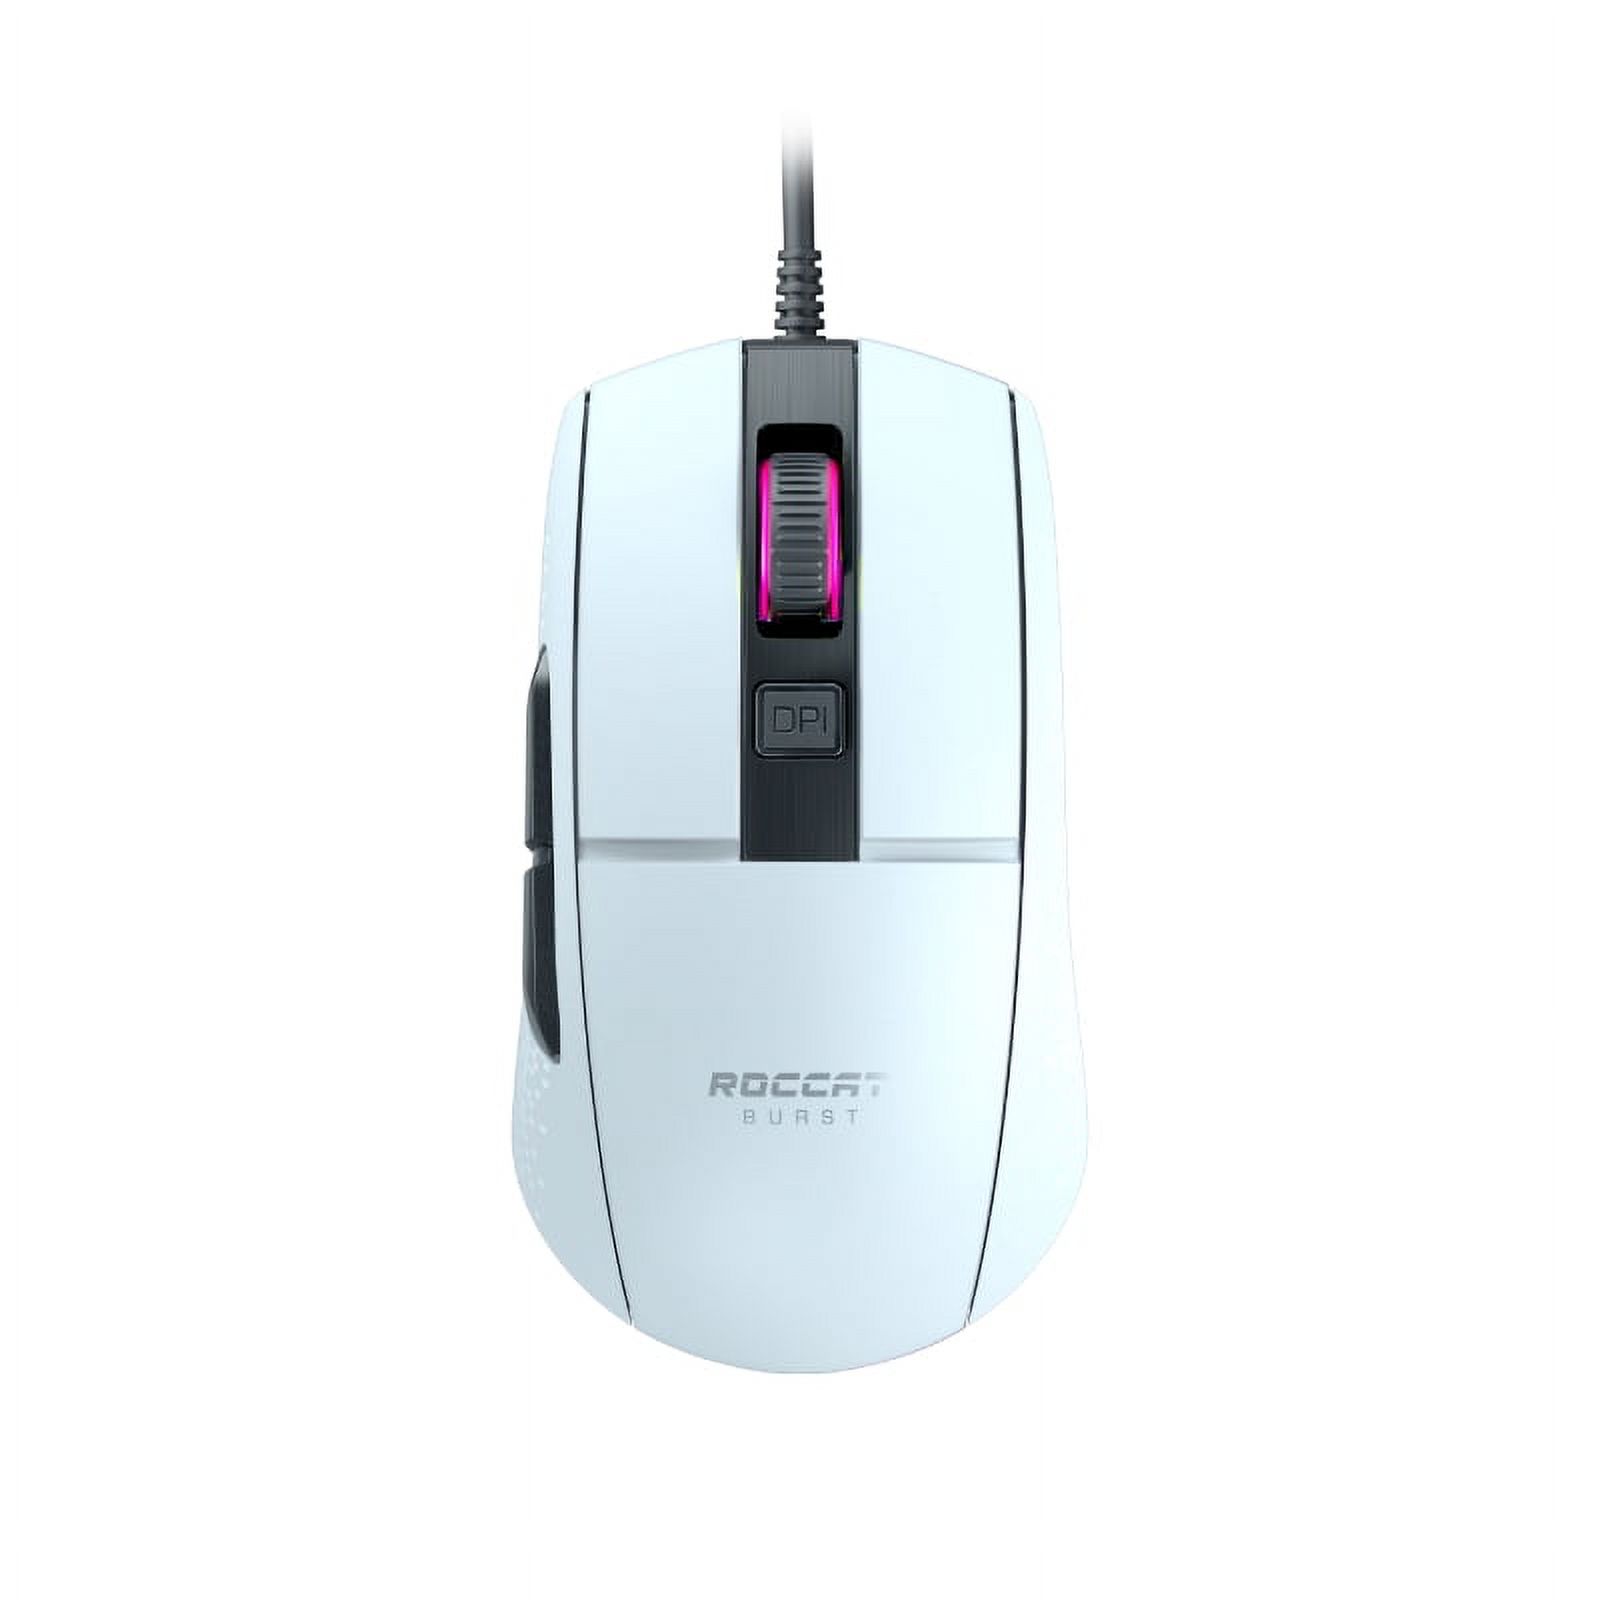 ROCCAT BURST Core - Mouse - optical - wired - USB 2.0 - white - image 1 of 3